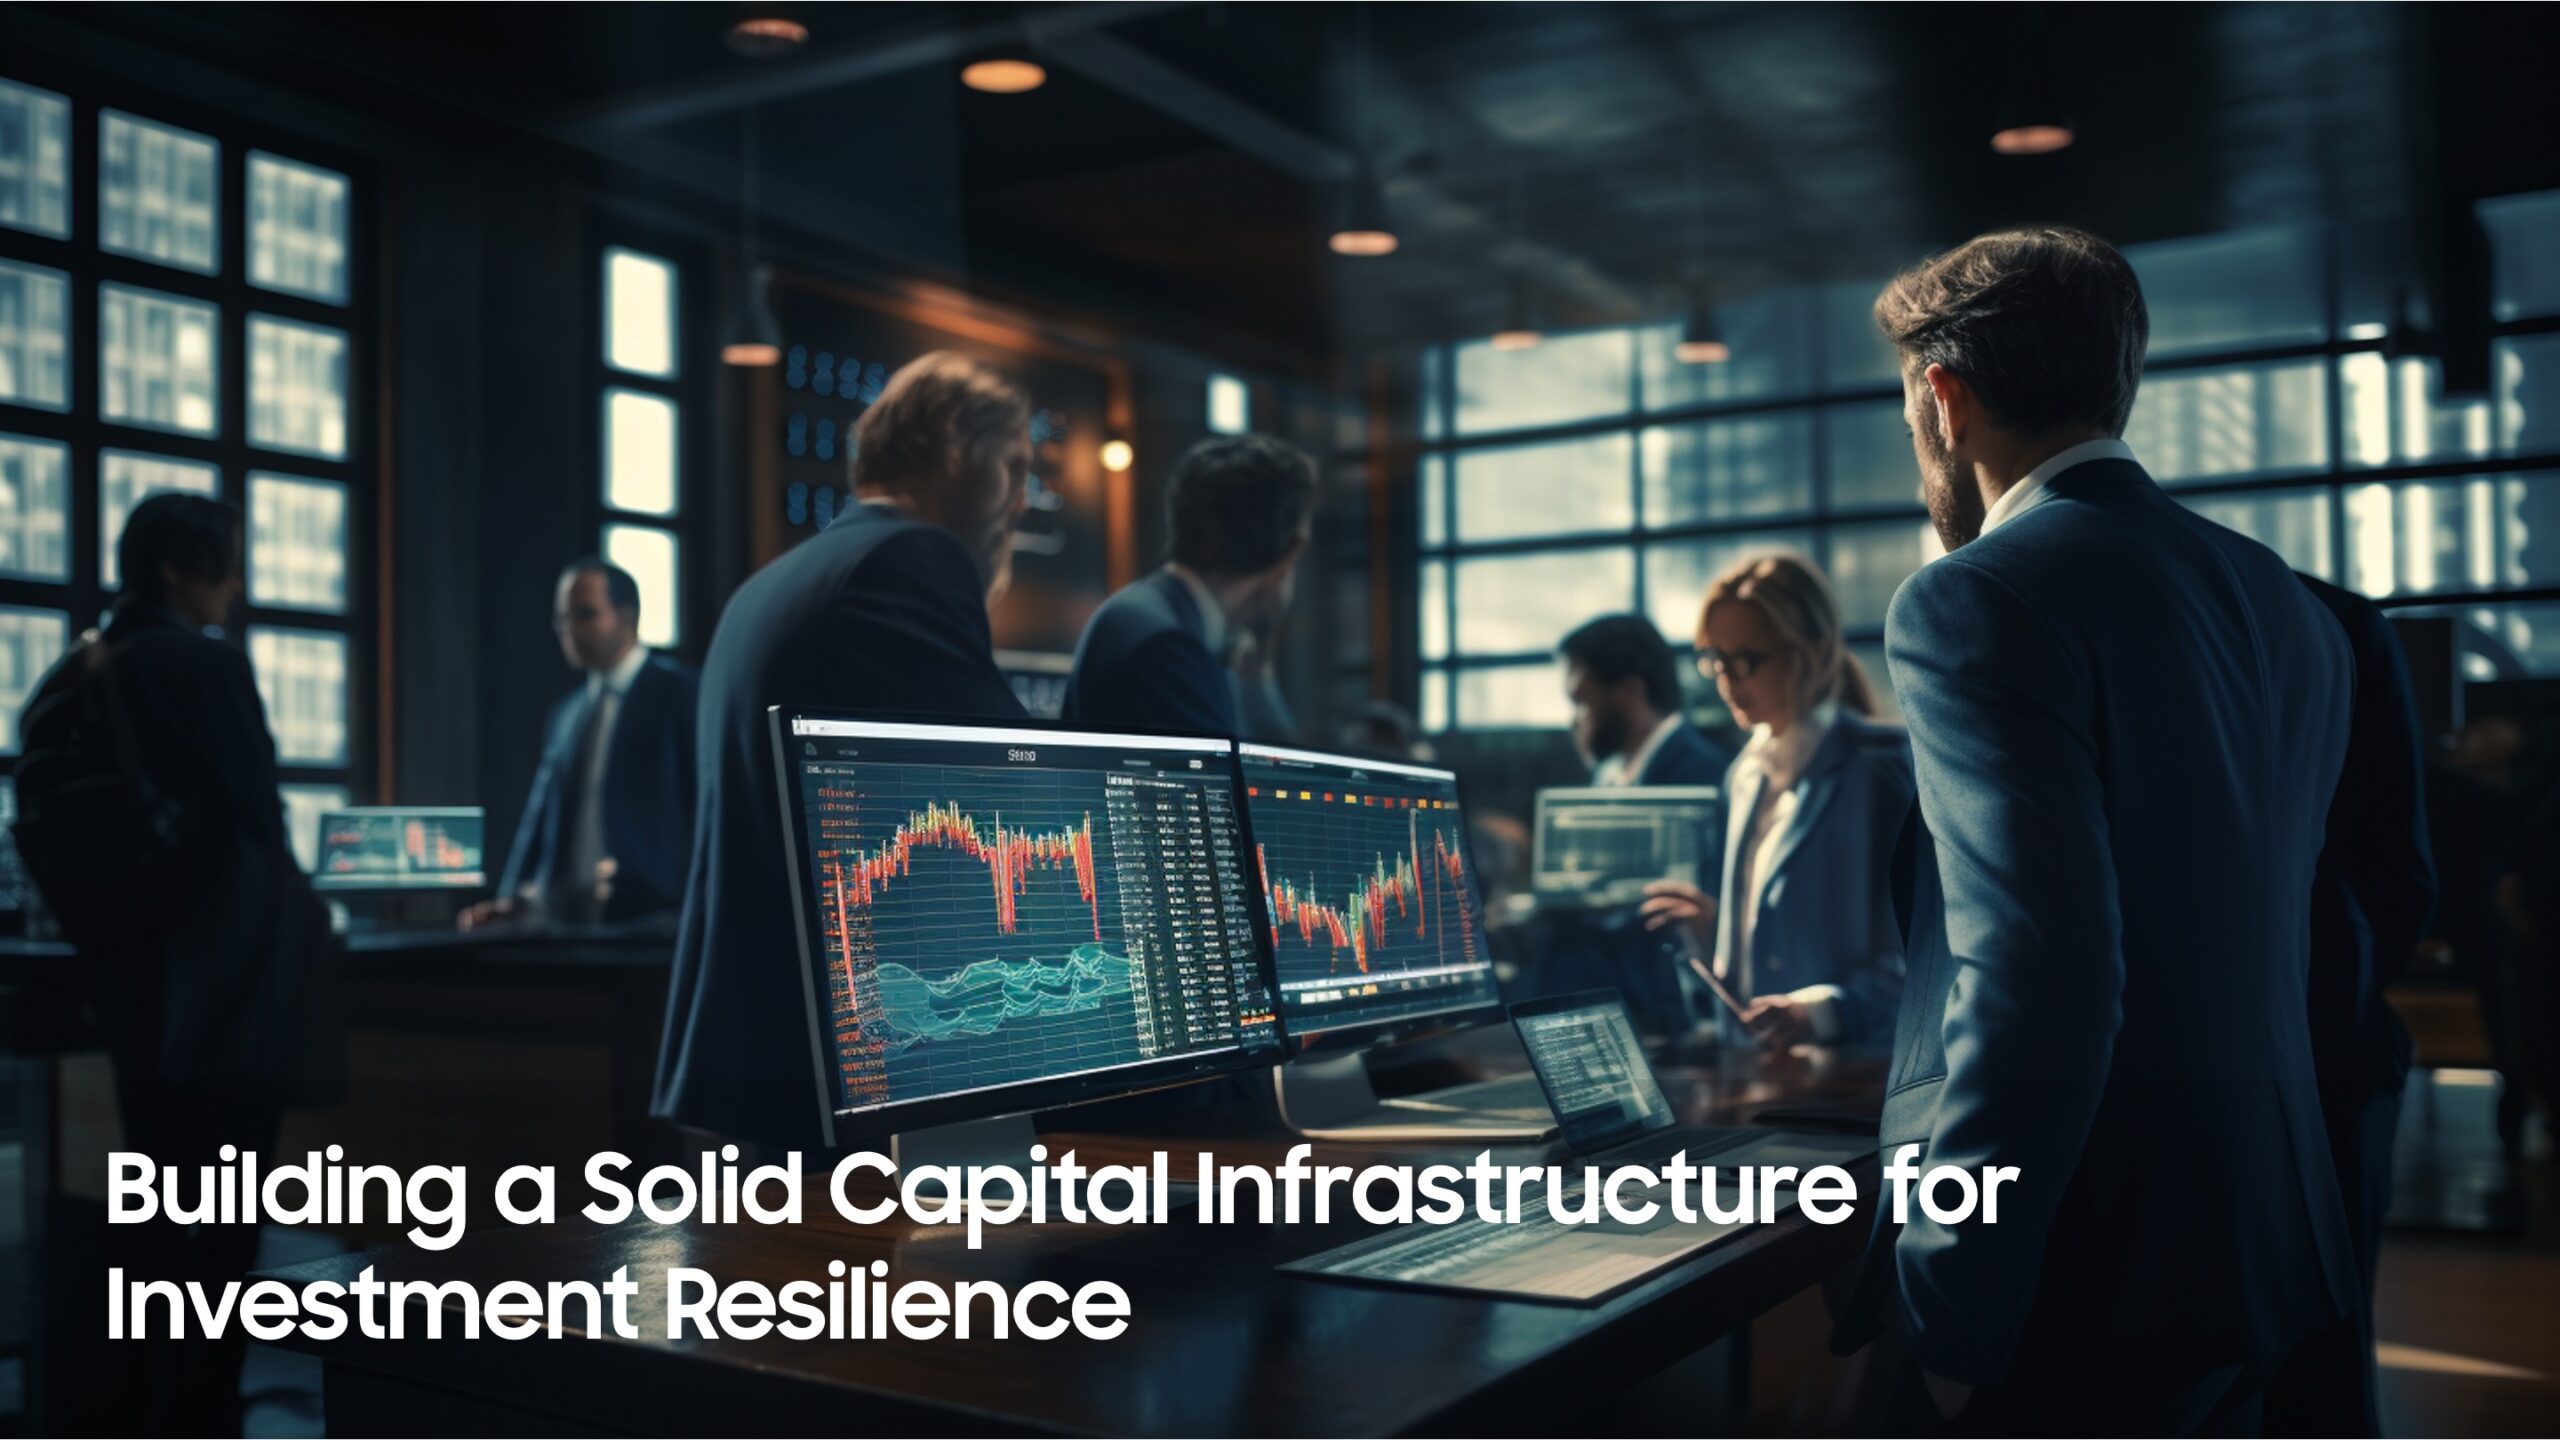 Building a Solid Capital Infrastructure for Investment Resilience